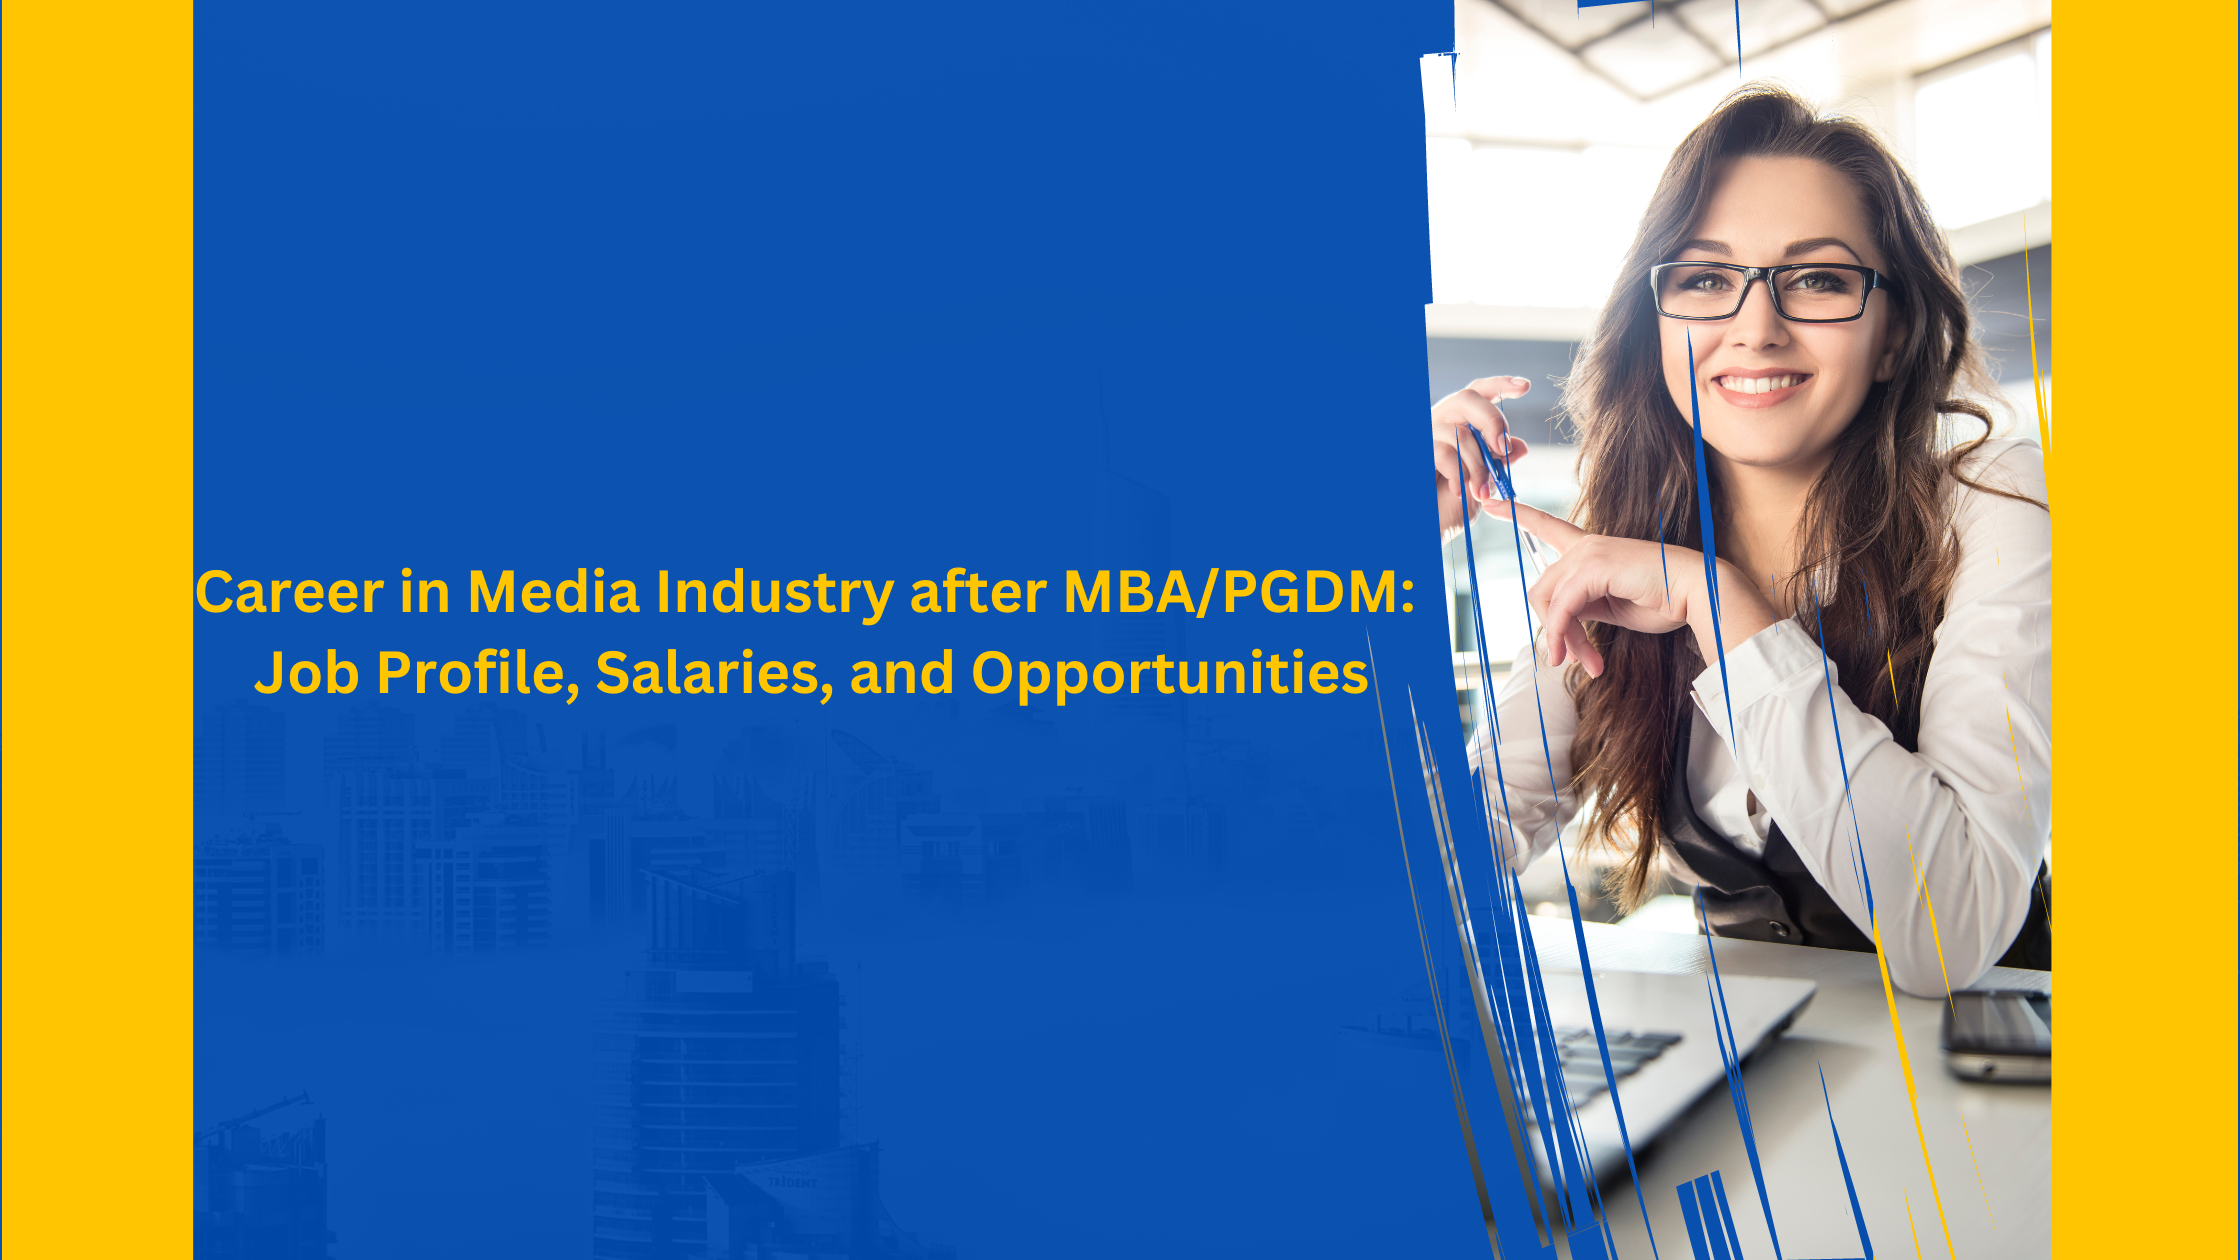 Career in Media Industry after MBA/PGDM: Job Profile, Salaries, and Opportunities